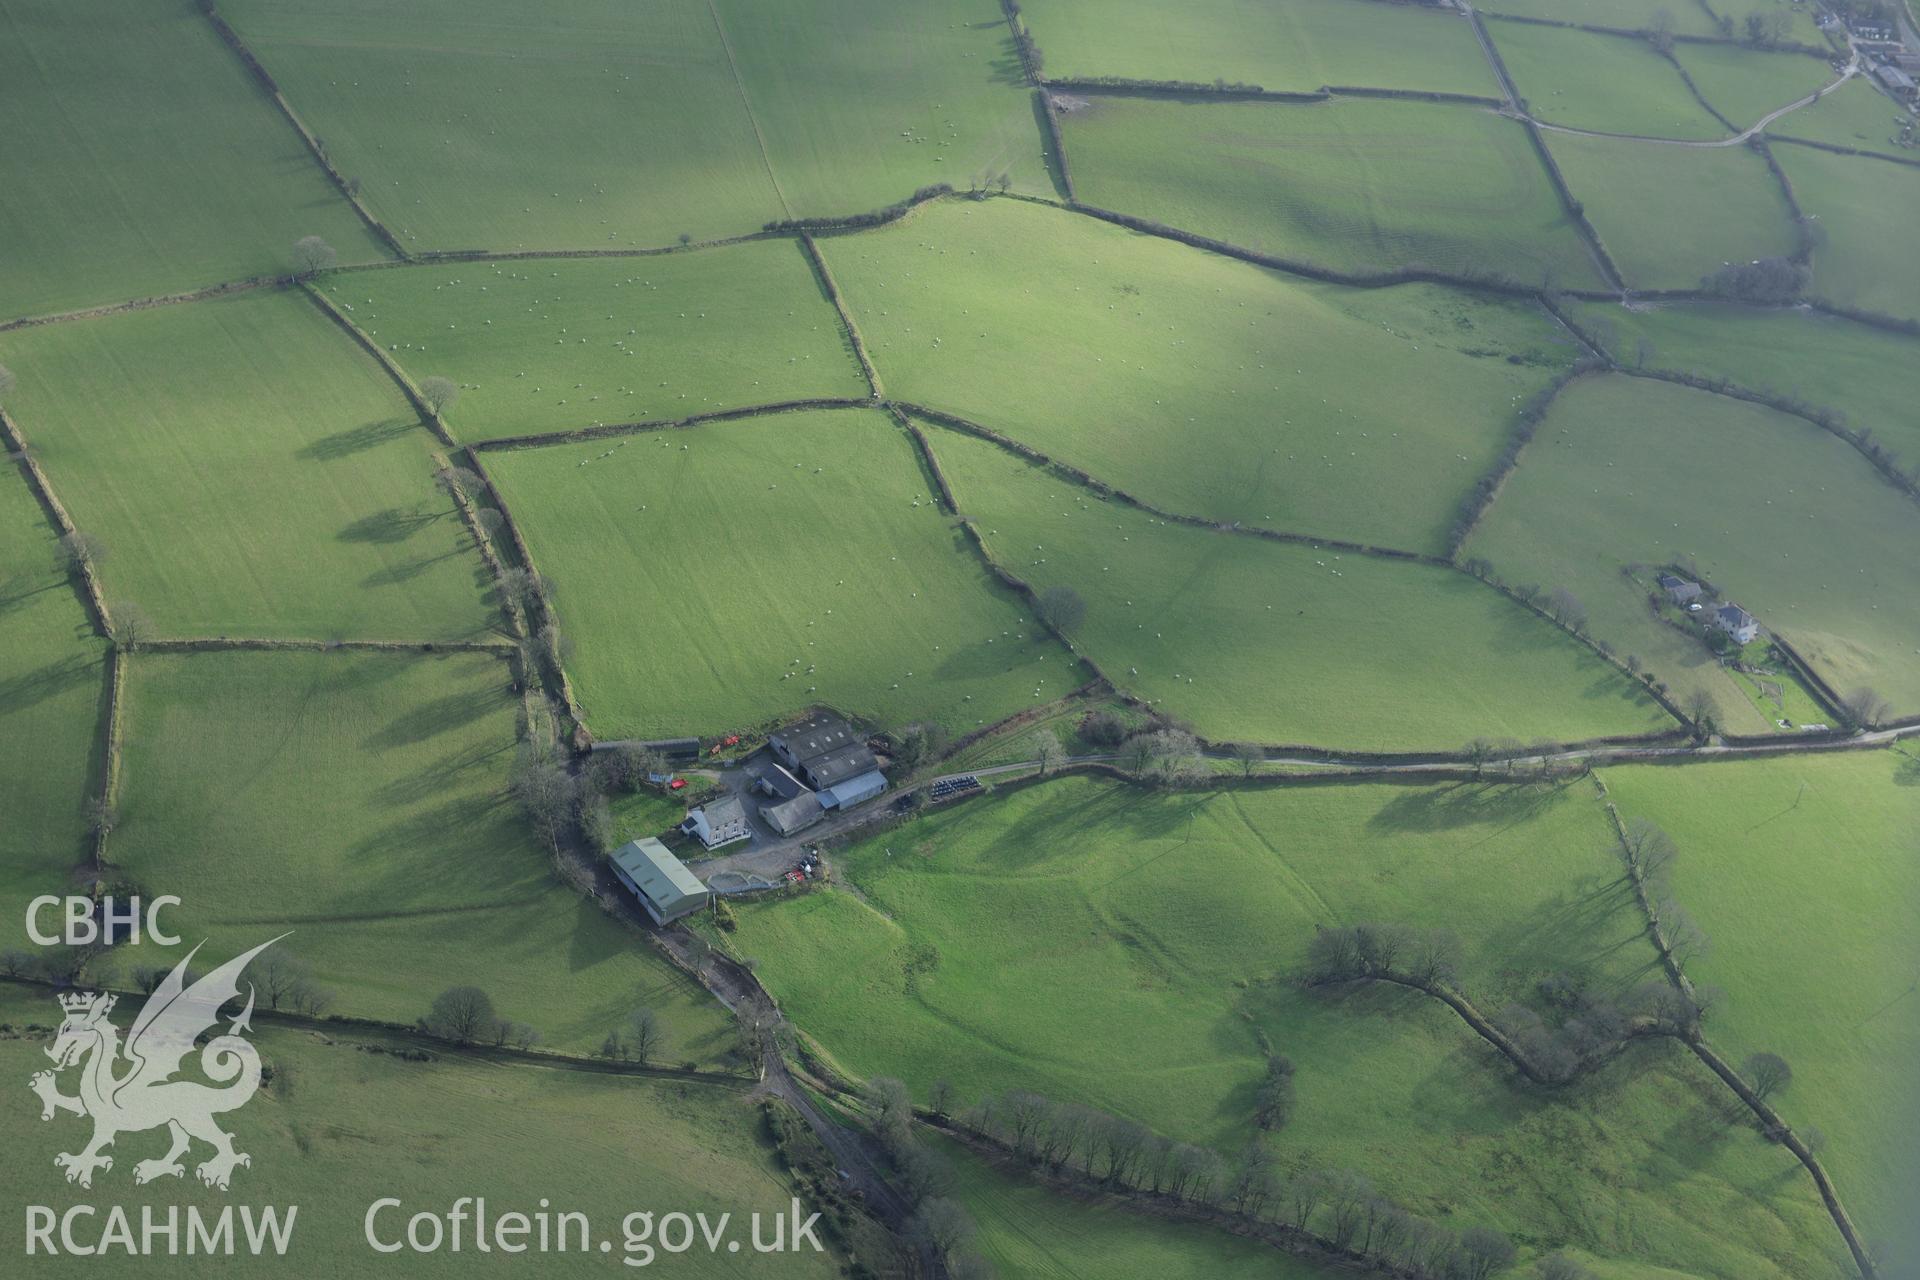 Pontcoy Farm, 700 metres south west of Silian village. Oblique aerial photograph taken during the Royal Commission's programme of archaeological aerial reconnaissance by Toby Driver on 6th January 2015.